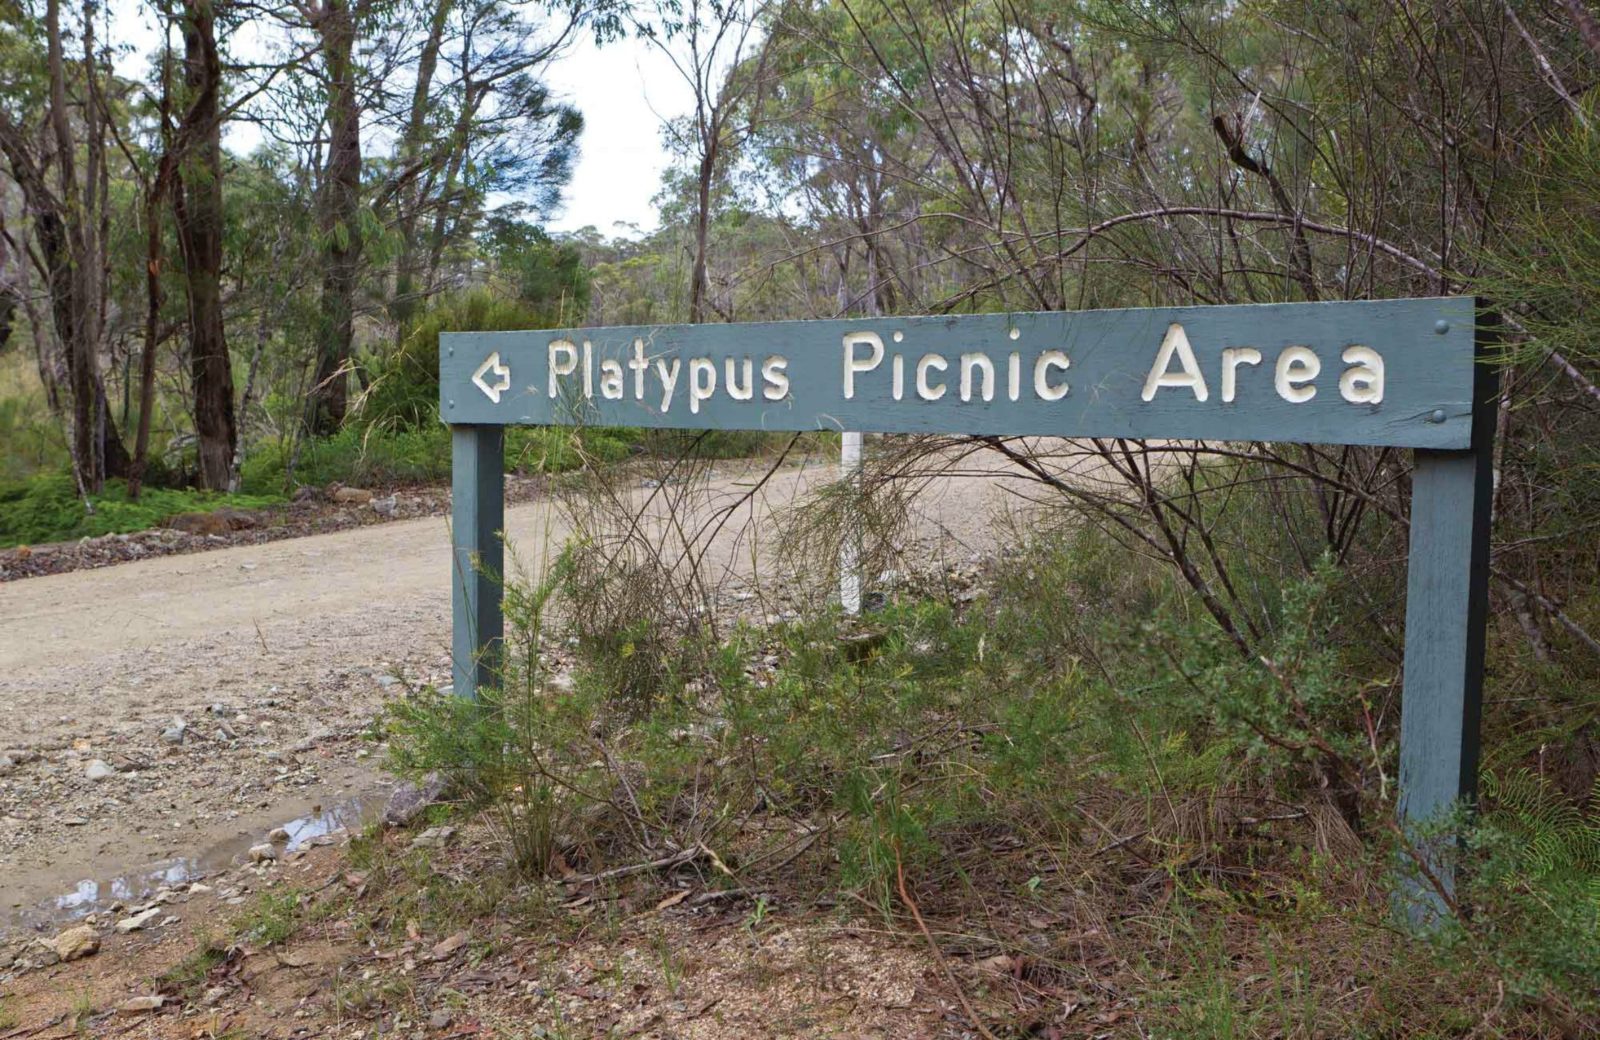 Platypus picnic area, Gibraltar Range National Park. Photo: Rob Cleary